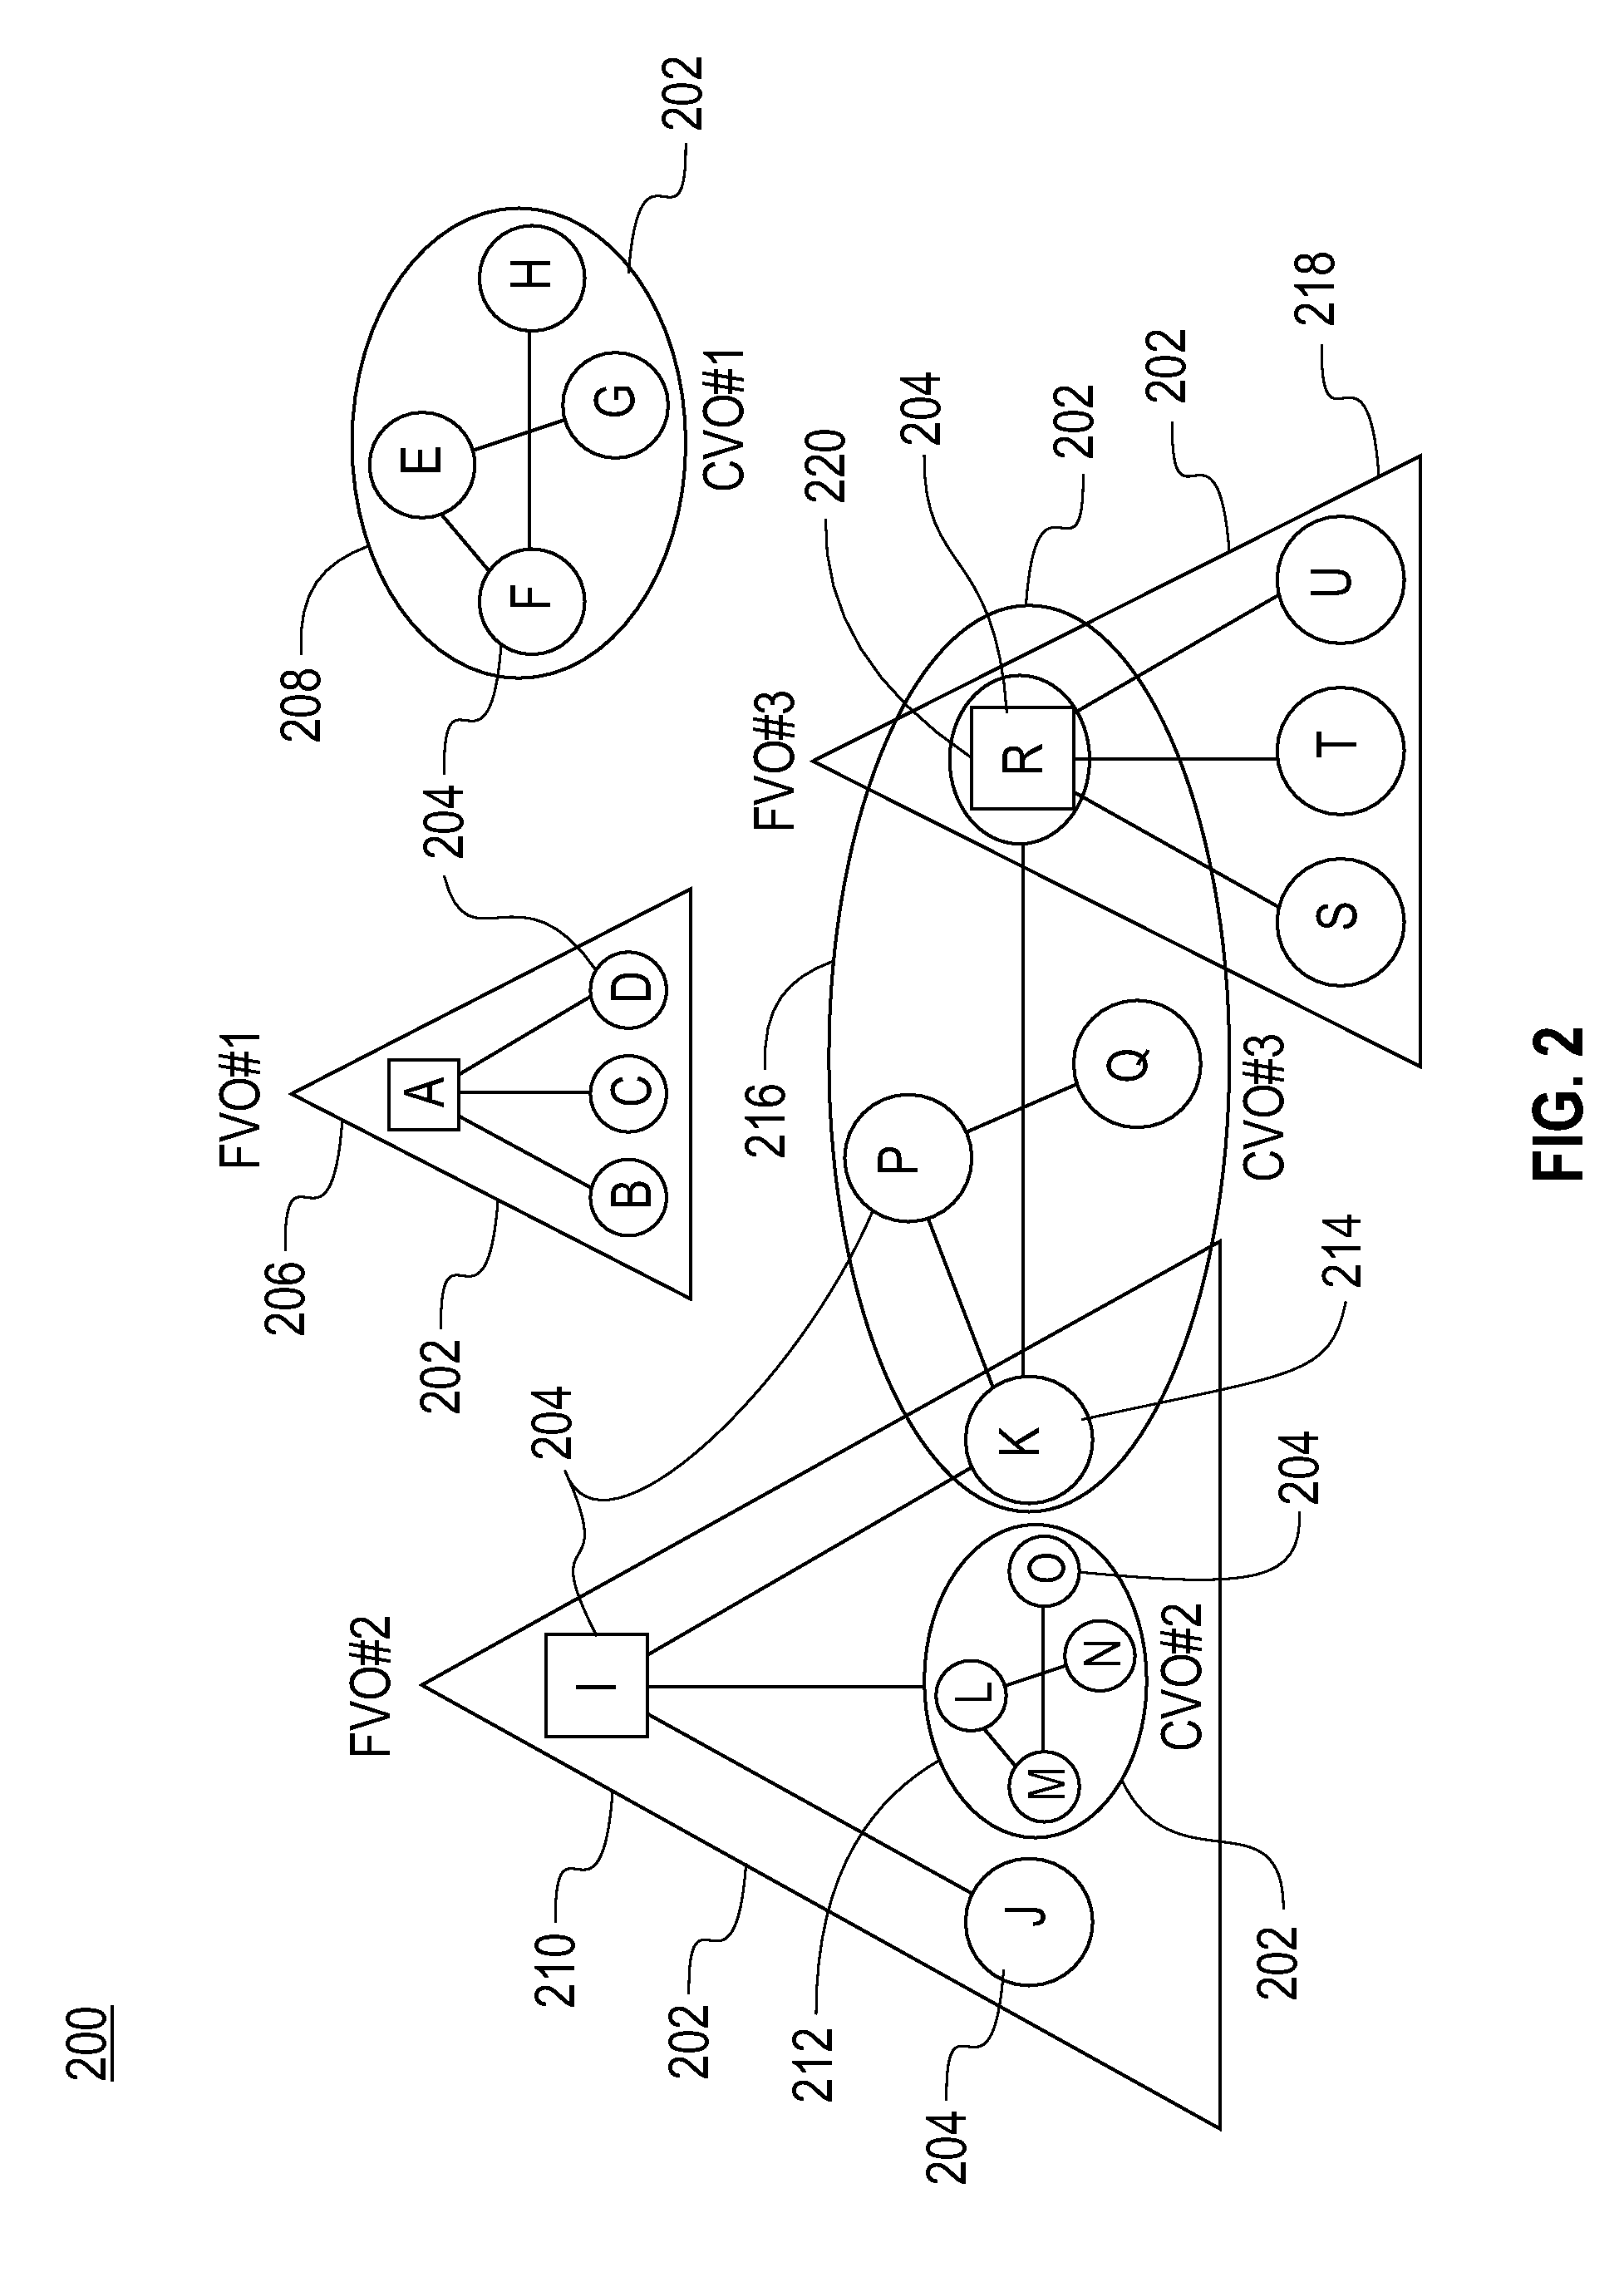 Methods and Apparatus for Effective On-Line Backup Selection for Failure Recovery in Distributed Stream Processing Systems